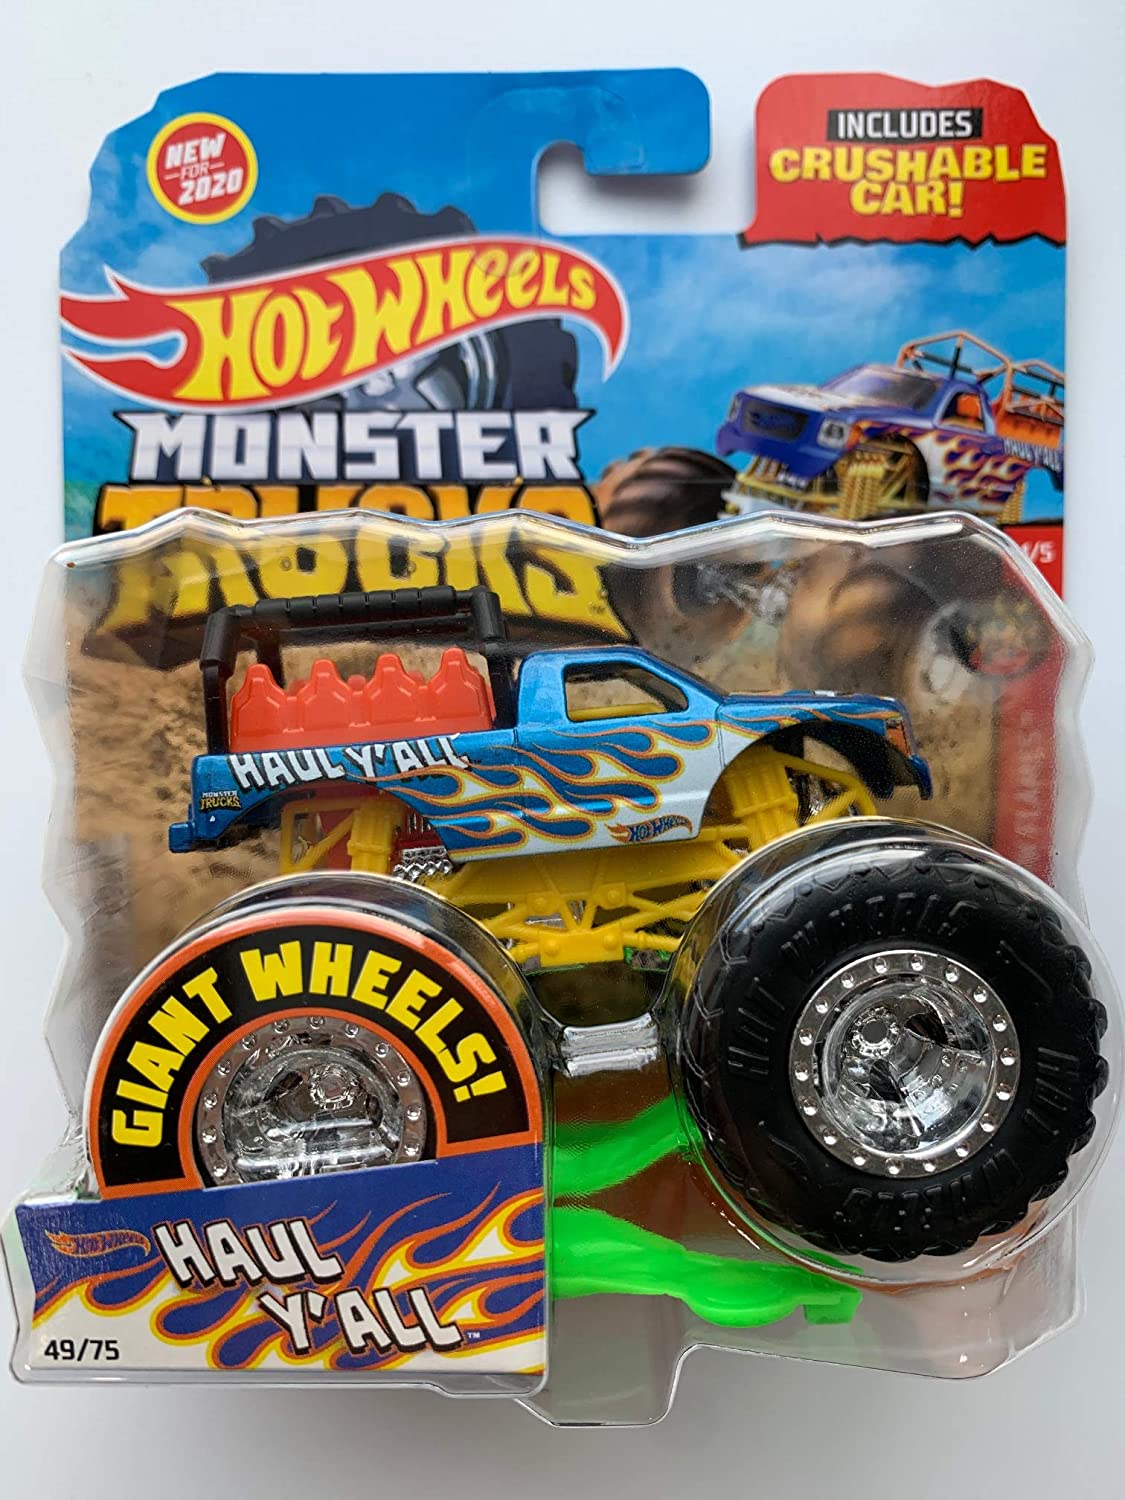 #4/5 Haul Y'All With Crushable Car: Monster Trucks 2020 1:64 Scale | Hot Wheels®